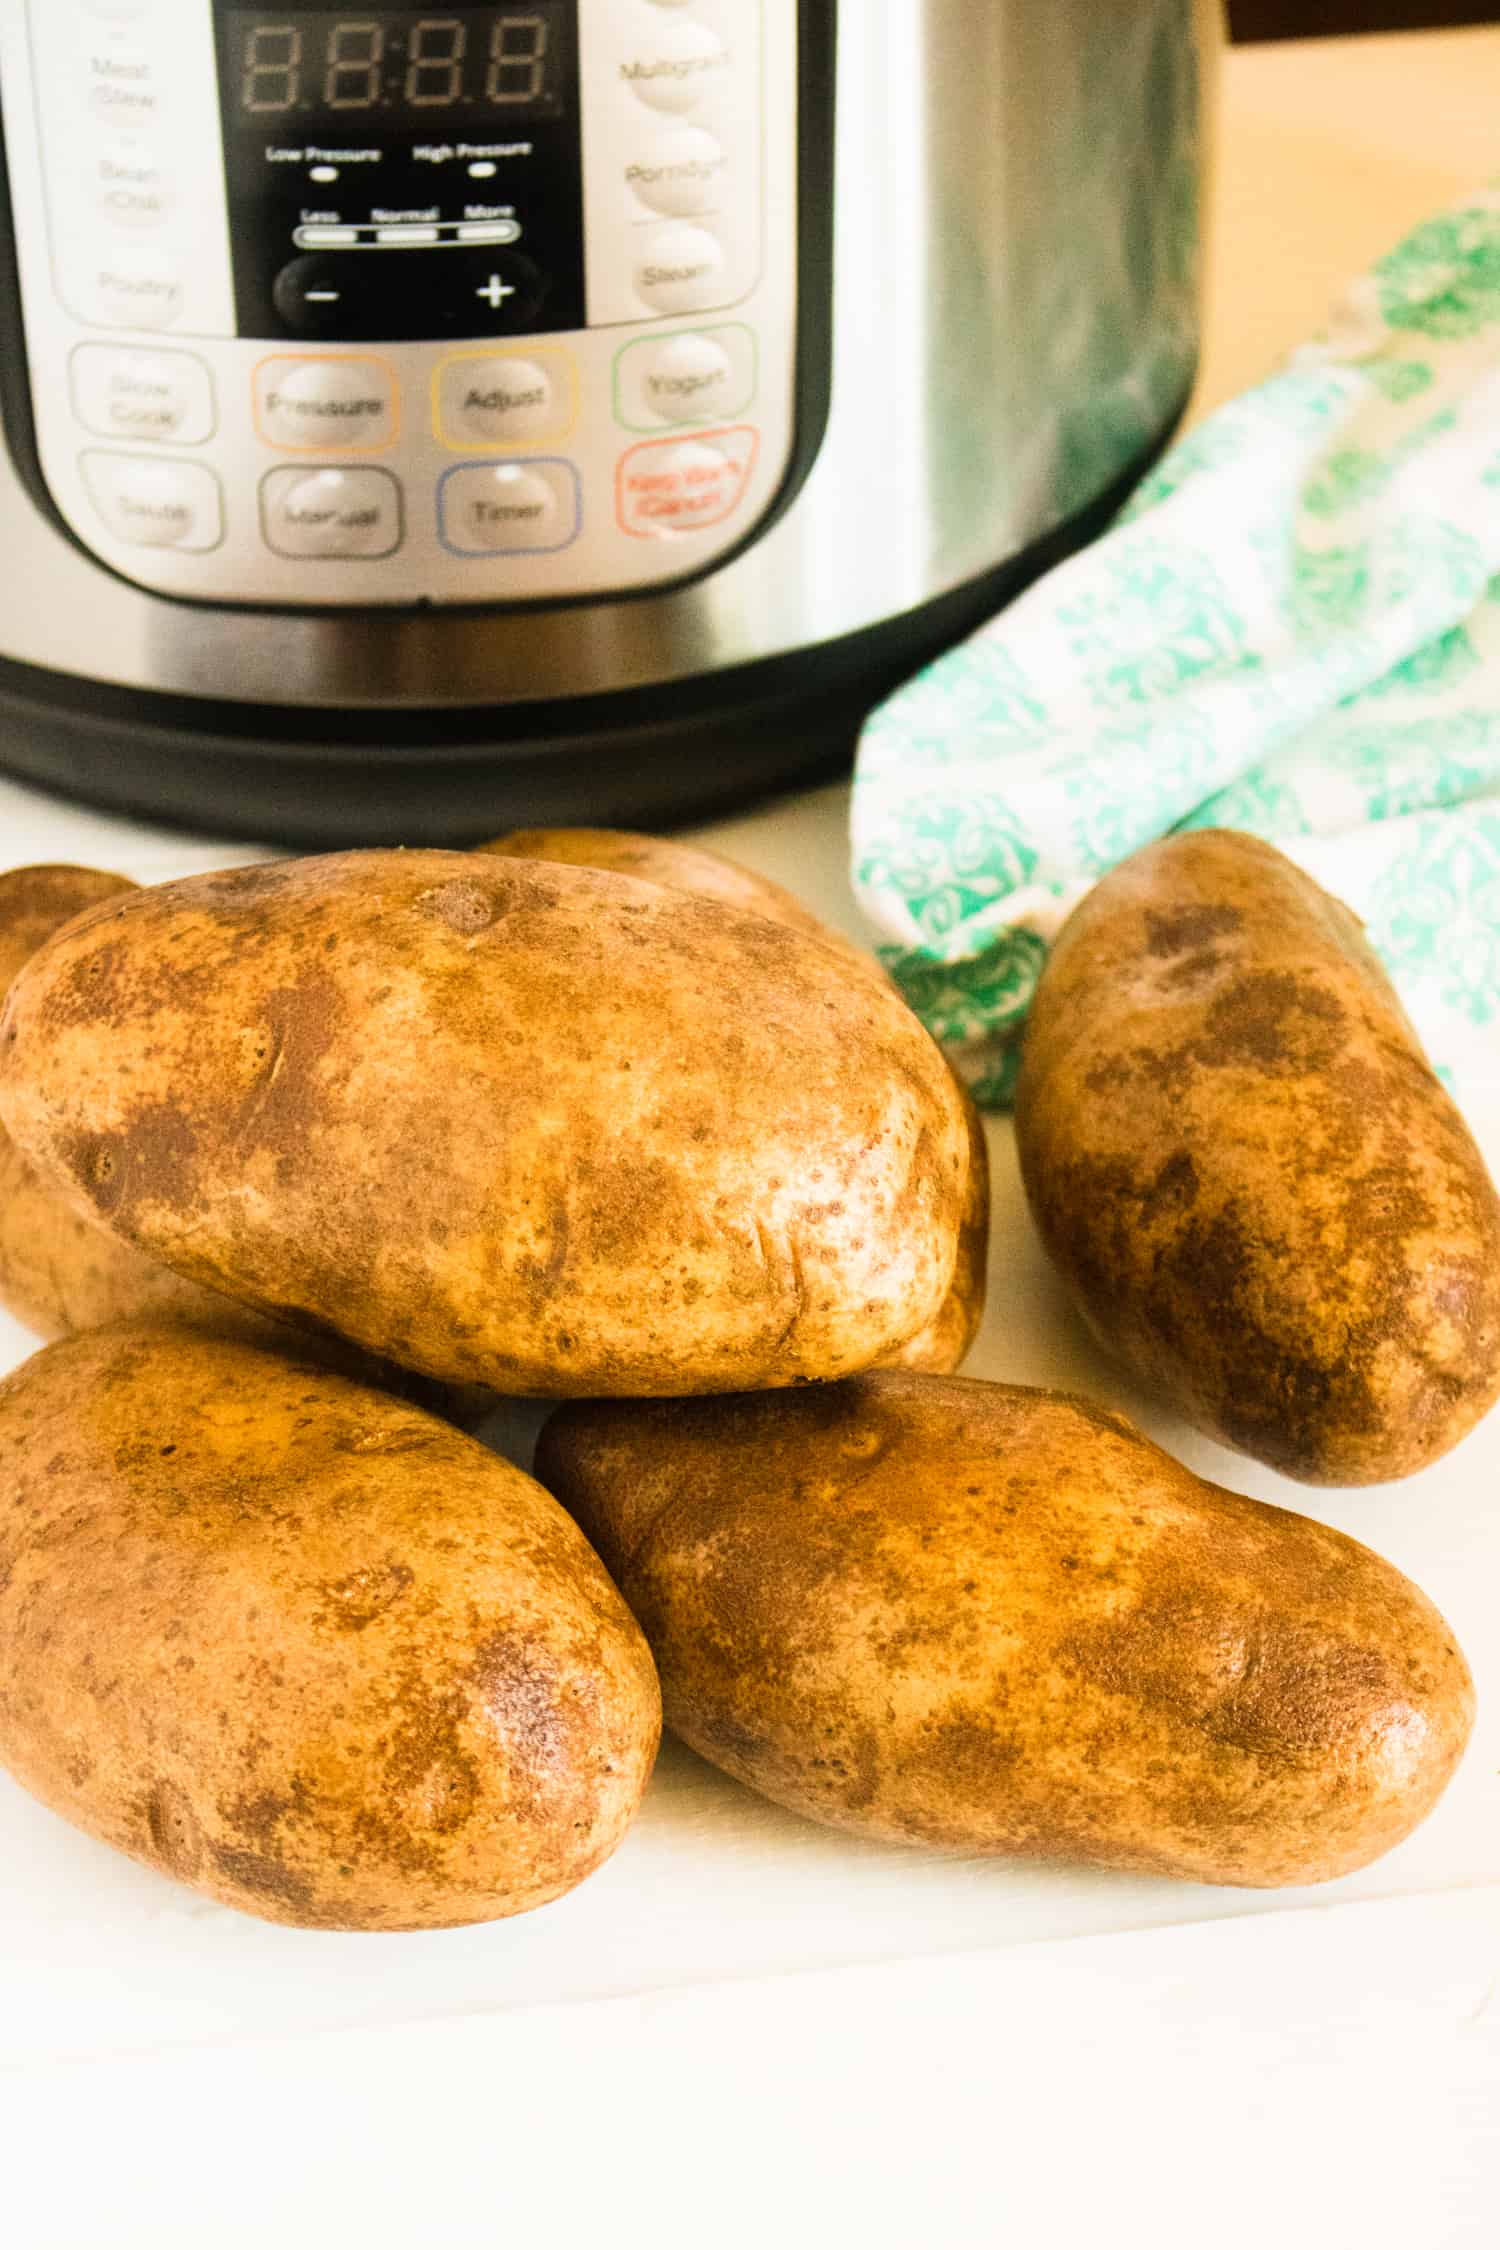 How to Make Instant Pot Baked Potatoes